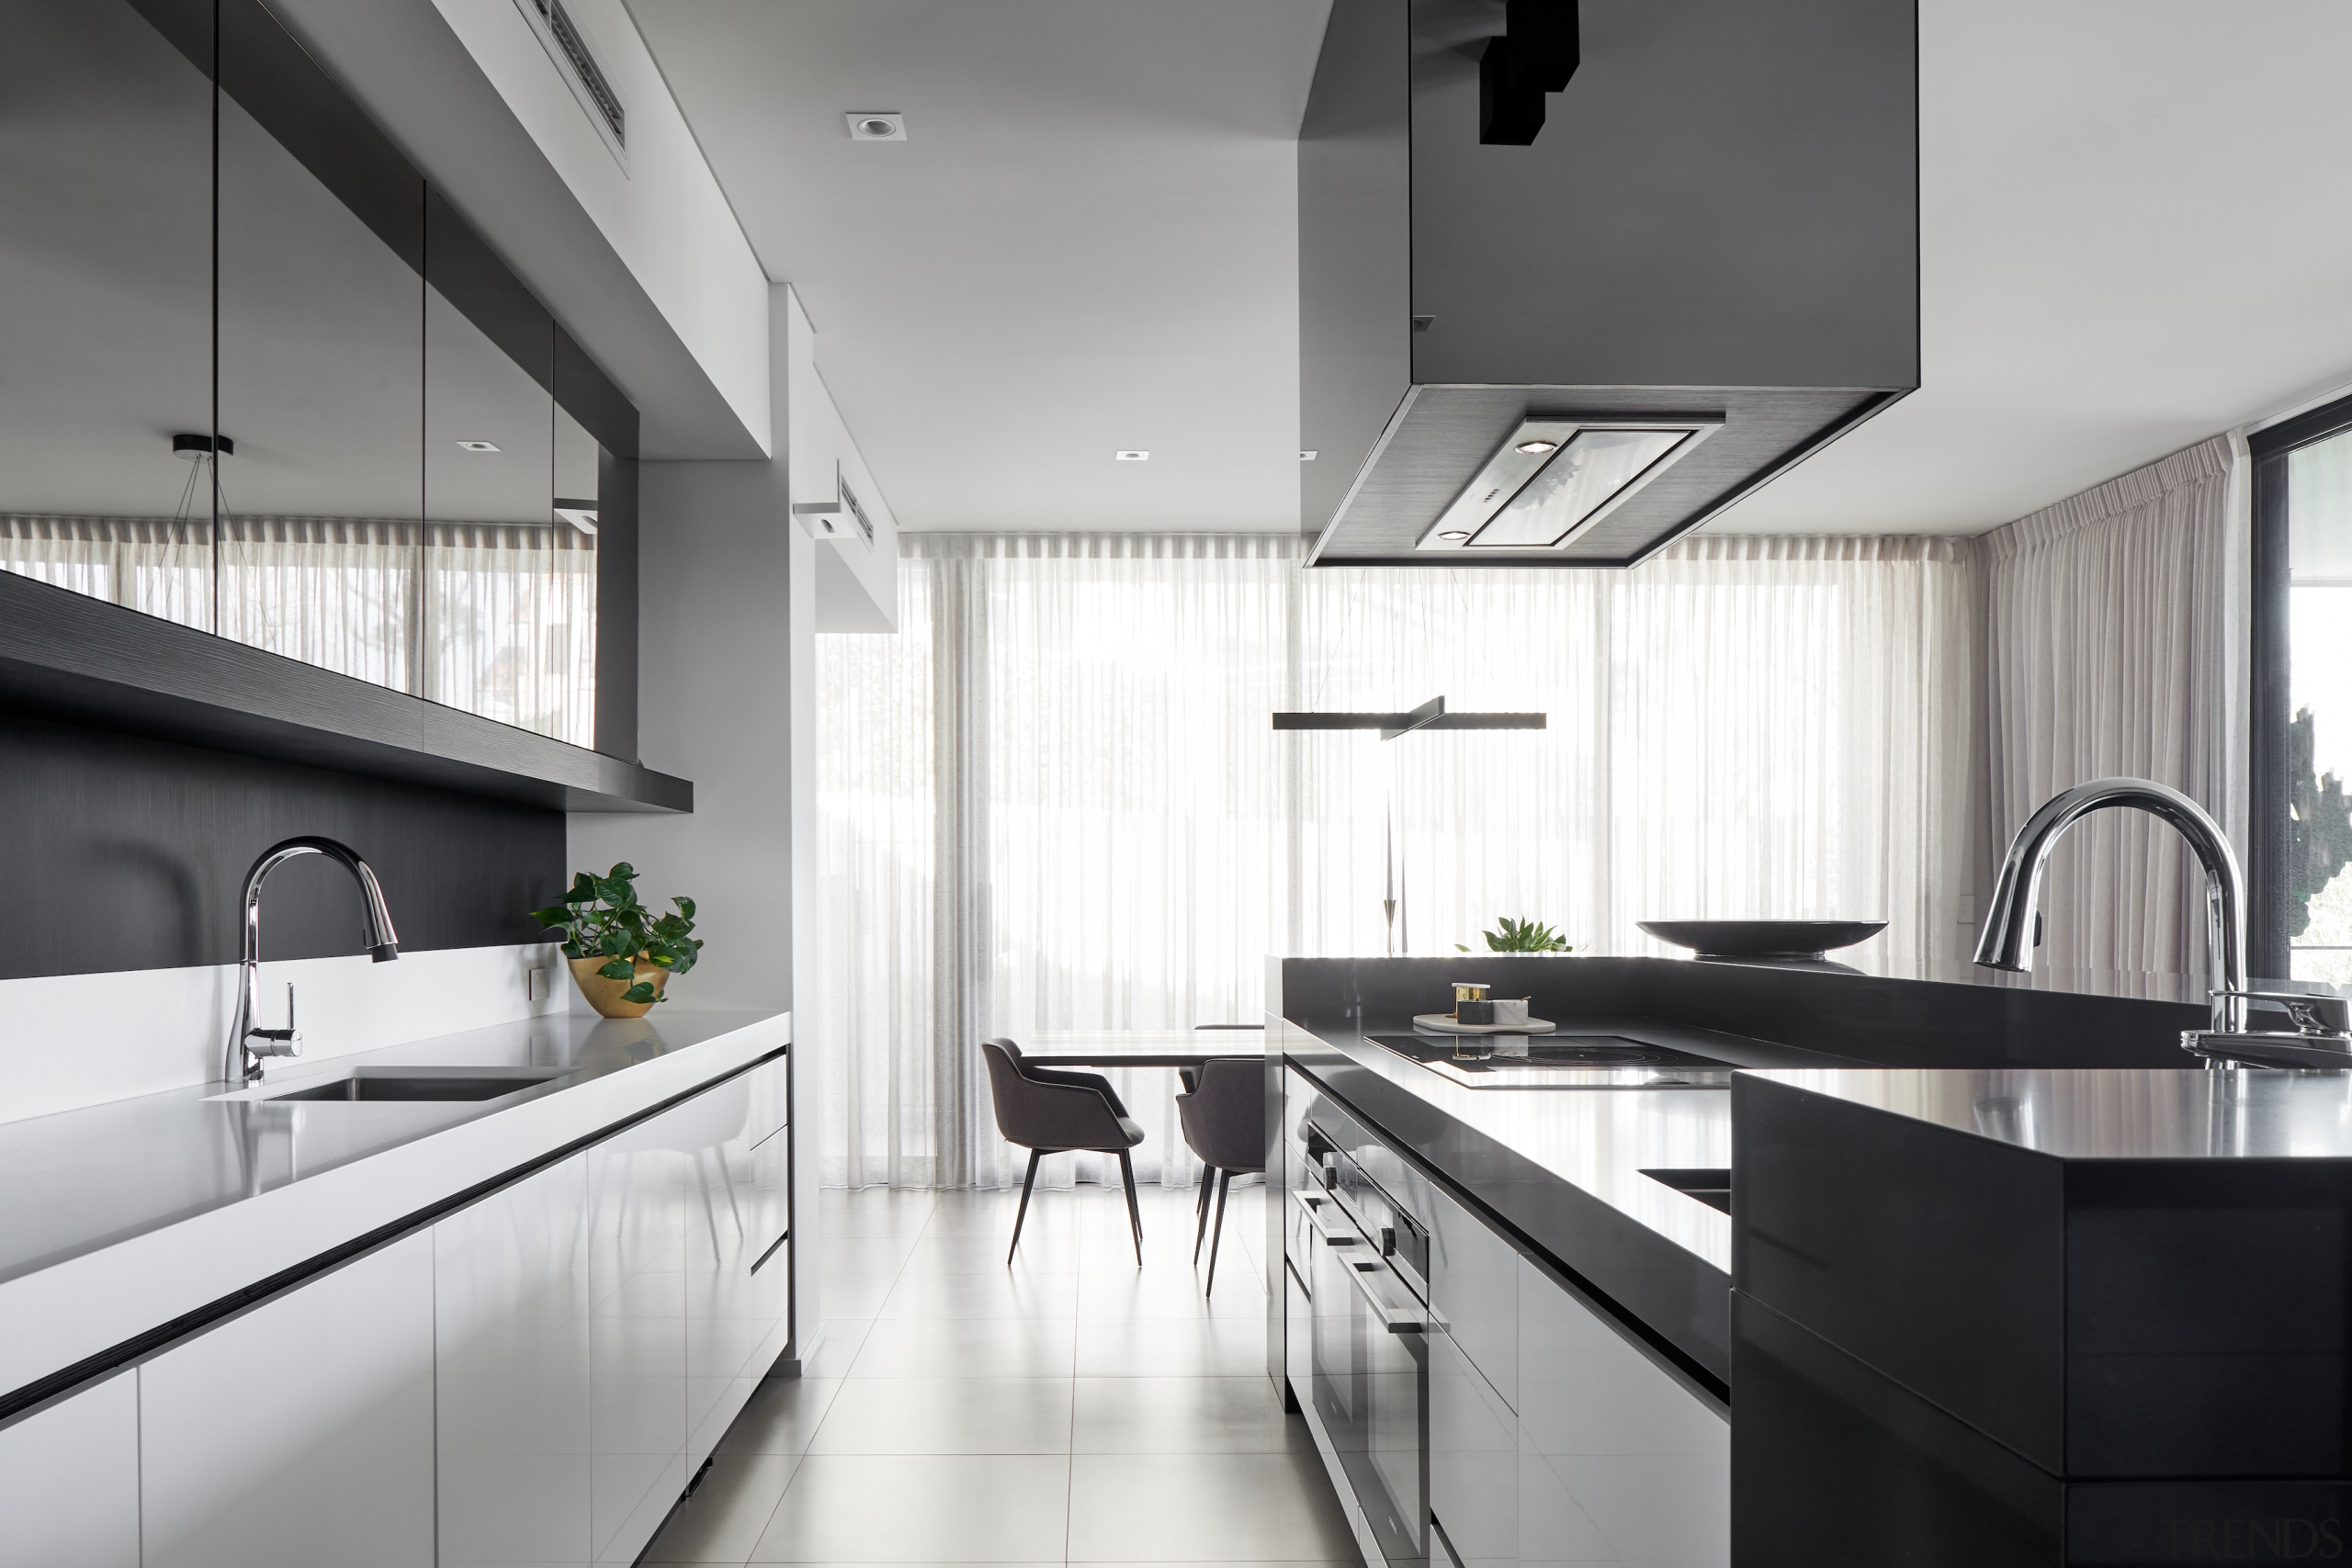 The minimalist kitchen features strong, simple forms. 